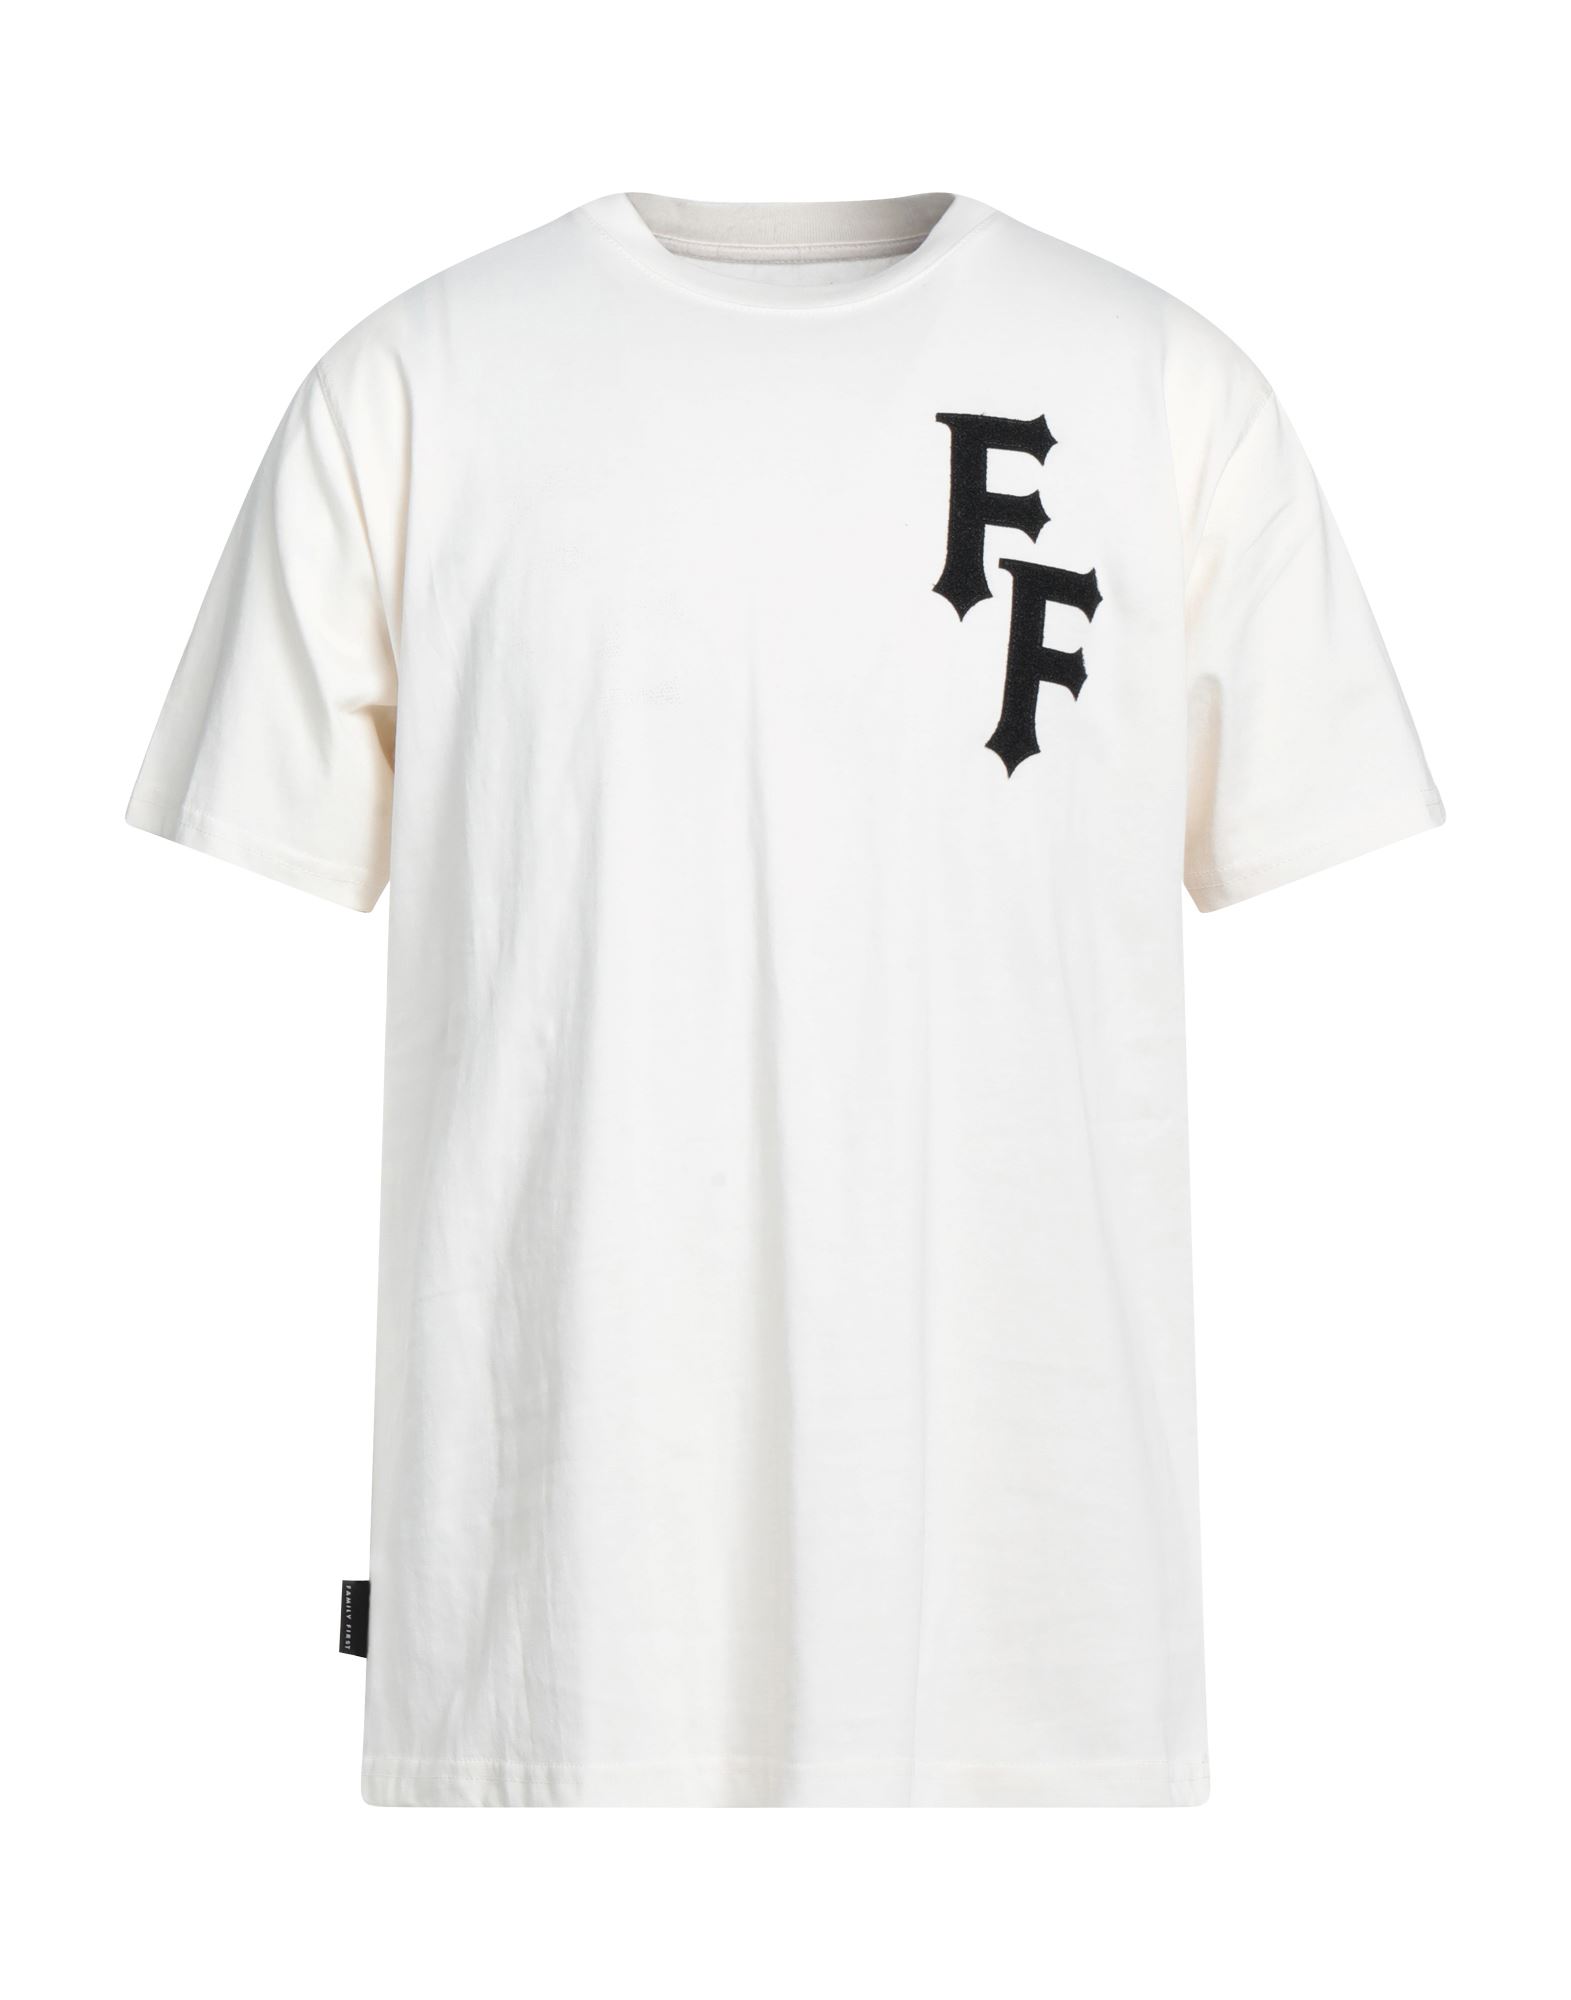 Family First Milano T-shirts In White